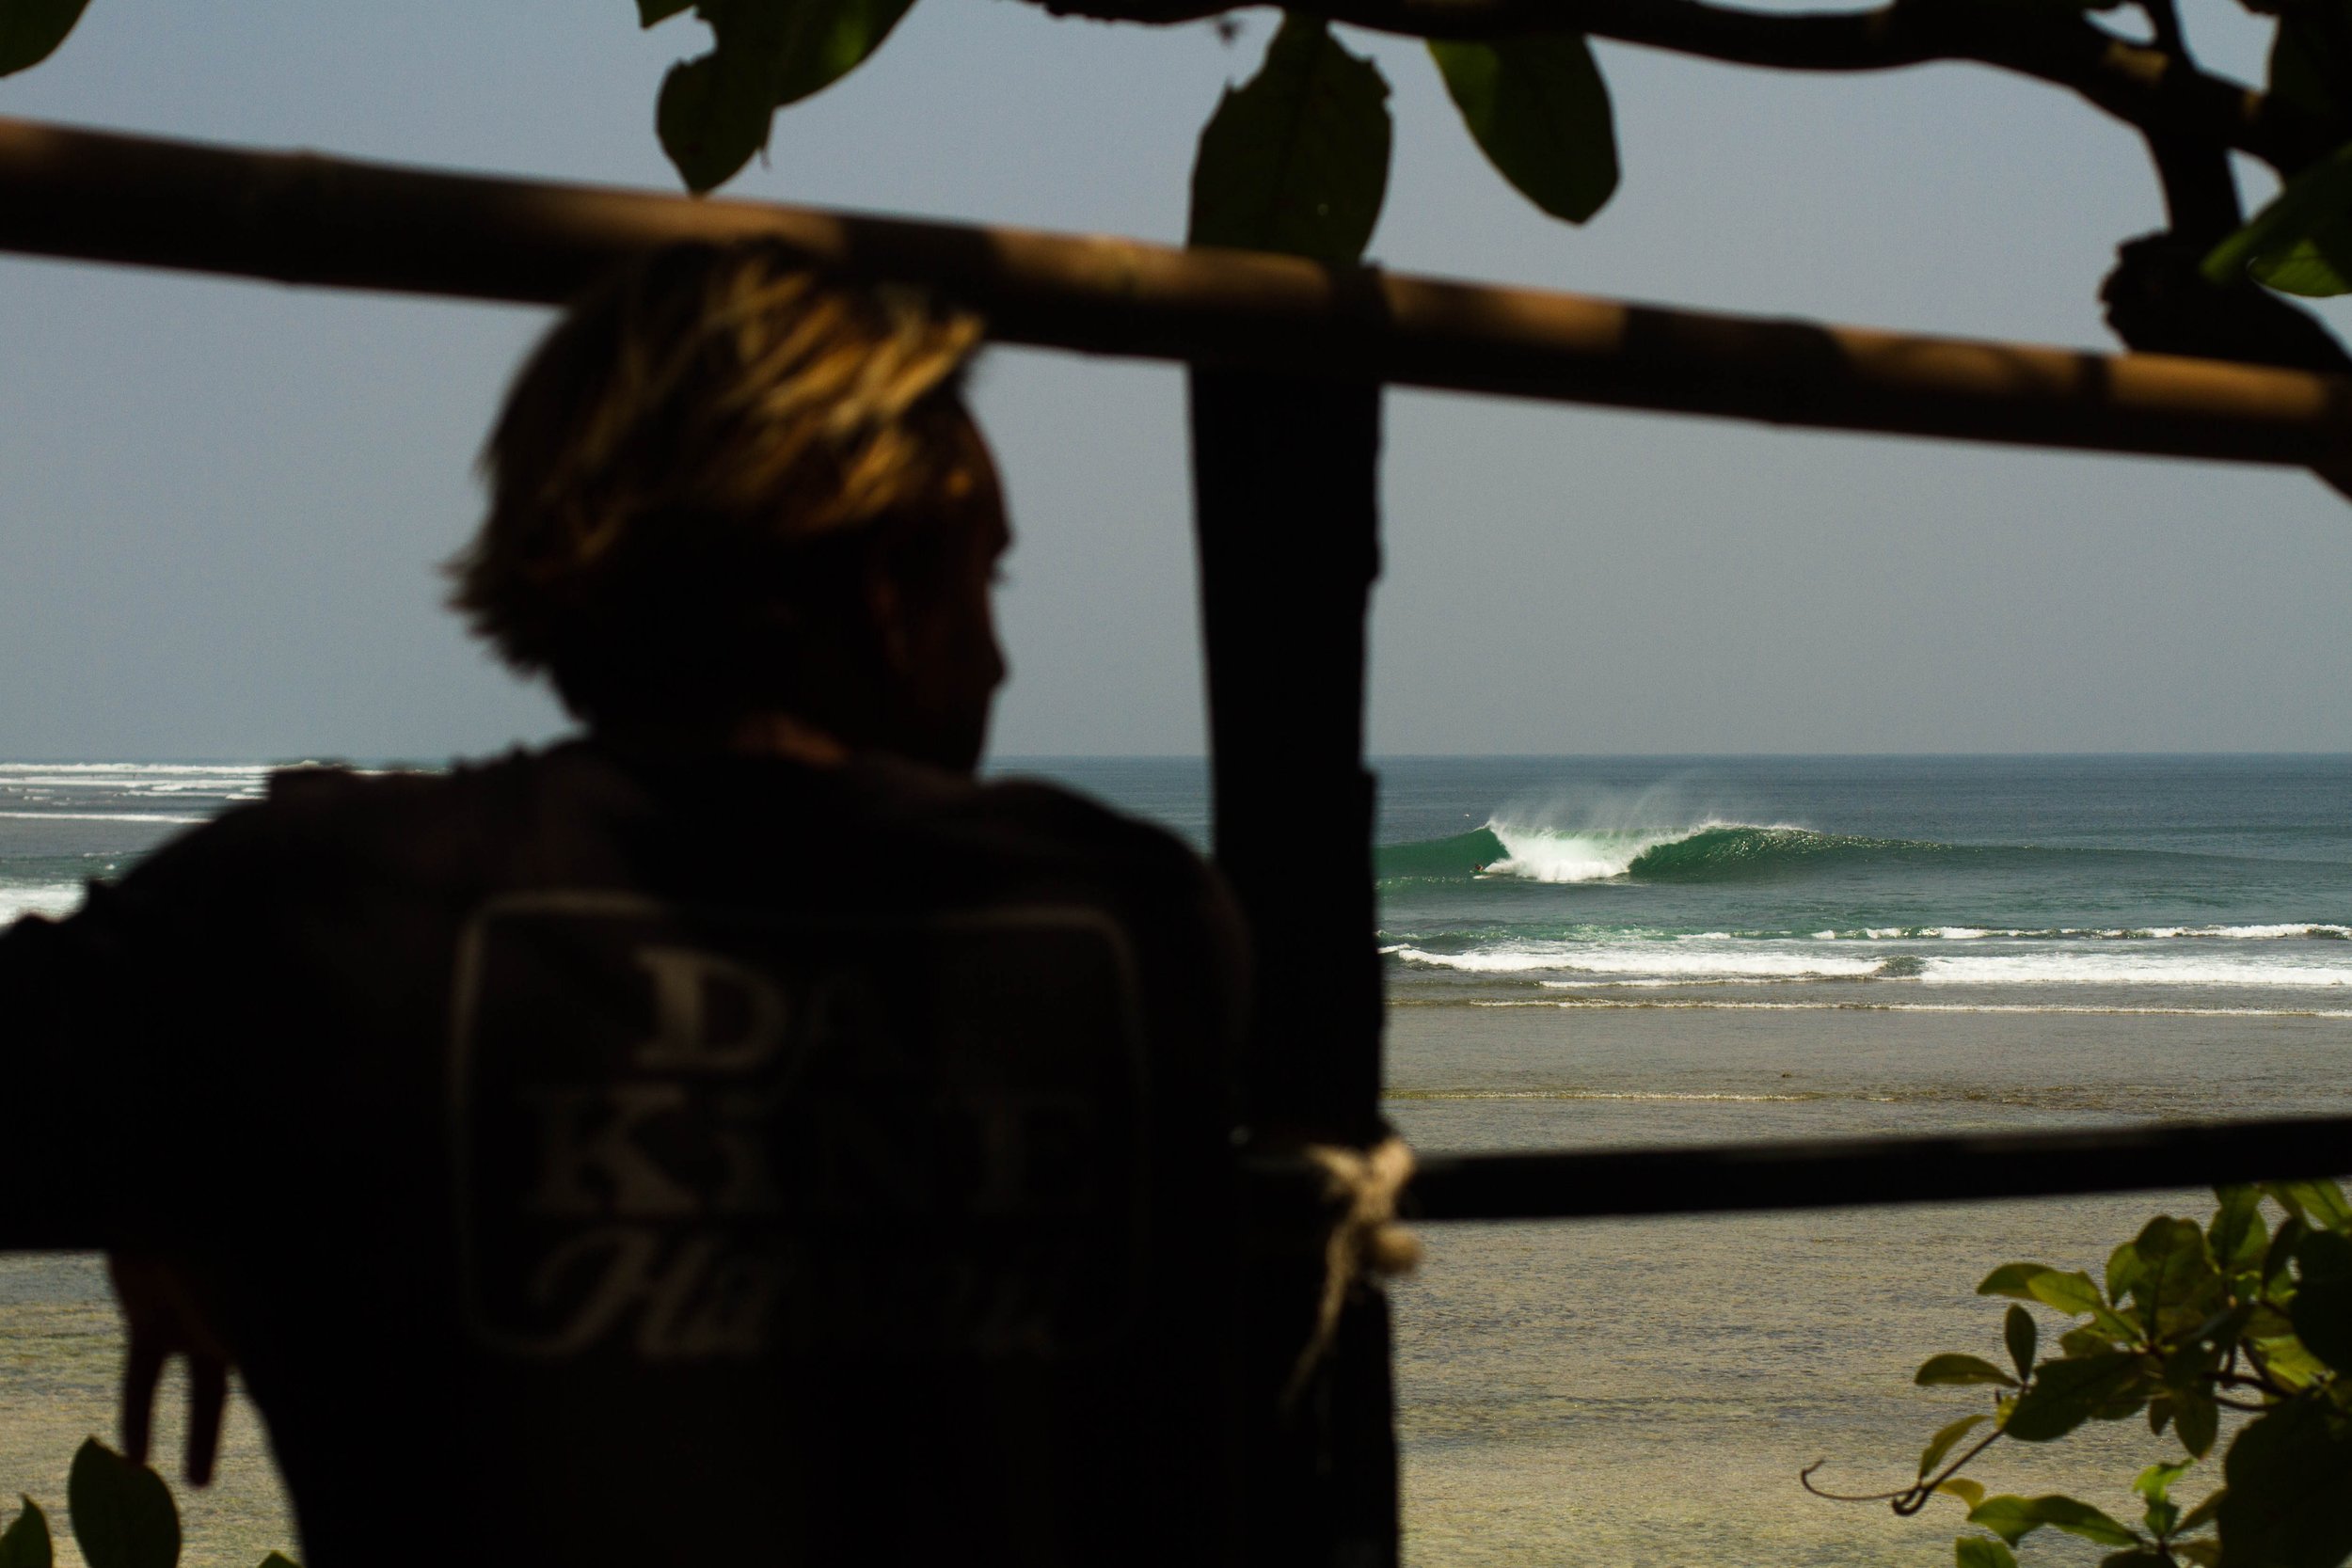 Noah Collins (@noahcollins) sitting in a tree house overlooking a perfect wave.jpg